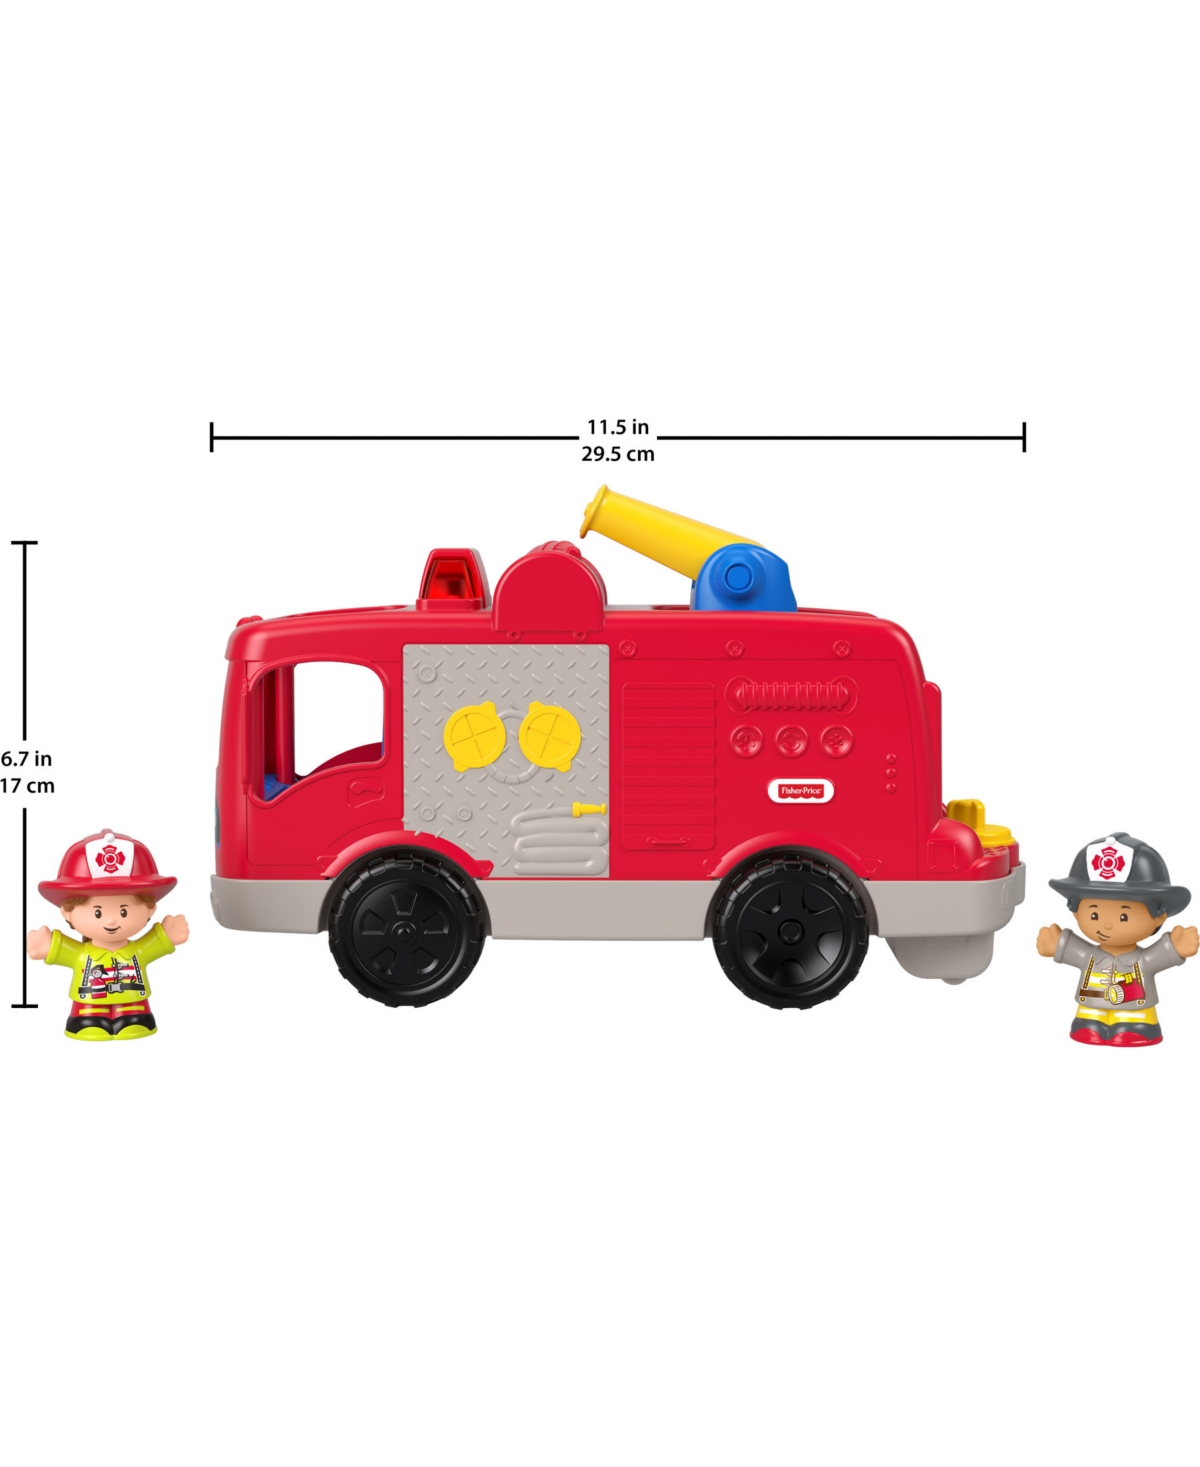 Shop Fisher Price Little People Helping Others Fire Truck In Multi